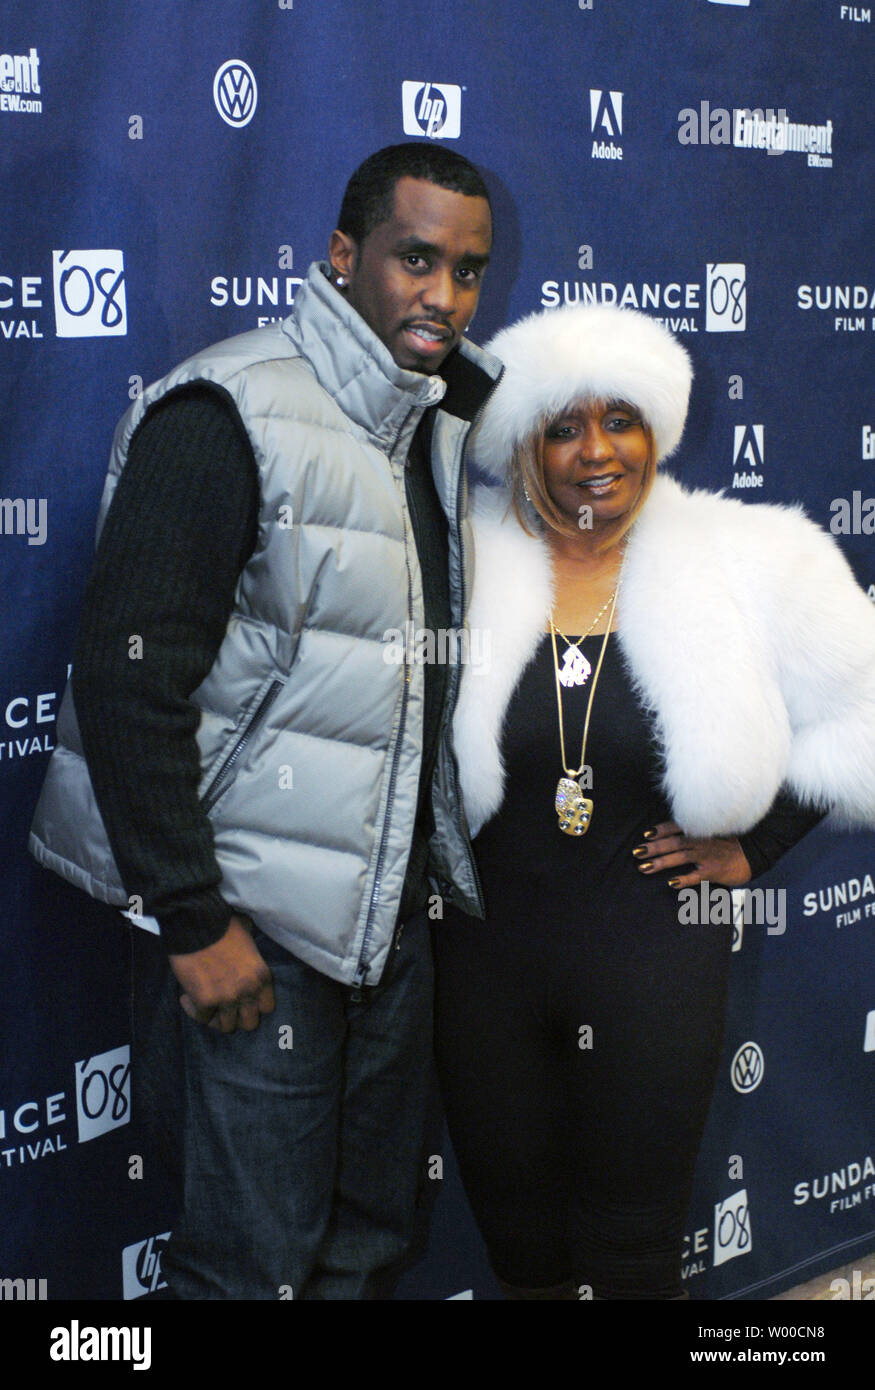 Sean Combs (L) and his mother Janice Combs attend the premiere of his film 'A Raisin in the Sun' at the Eccles Theater during the Sundance Film Festival in Park City, Utah on January 23, 2008. (UPI Photo/Alexis C. Glenn) Stock Photo